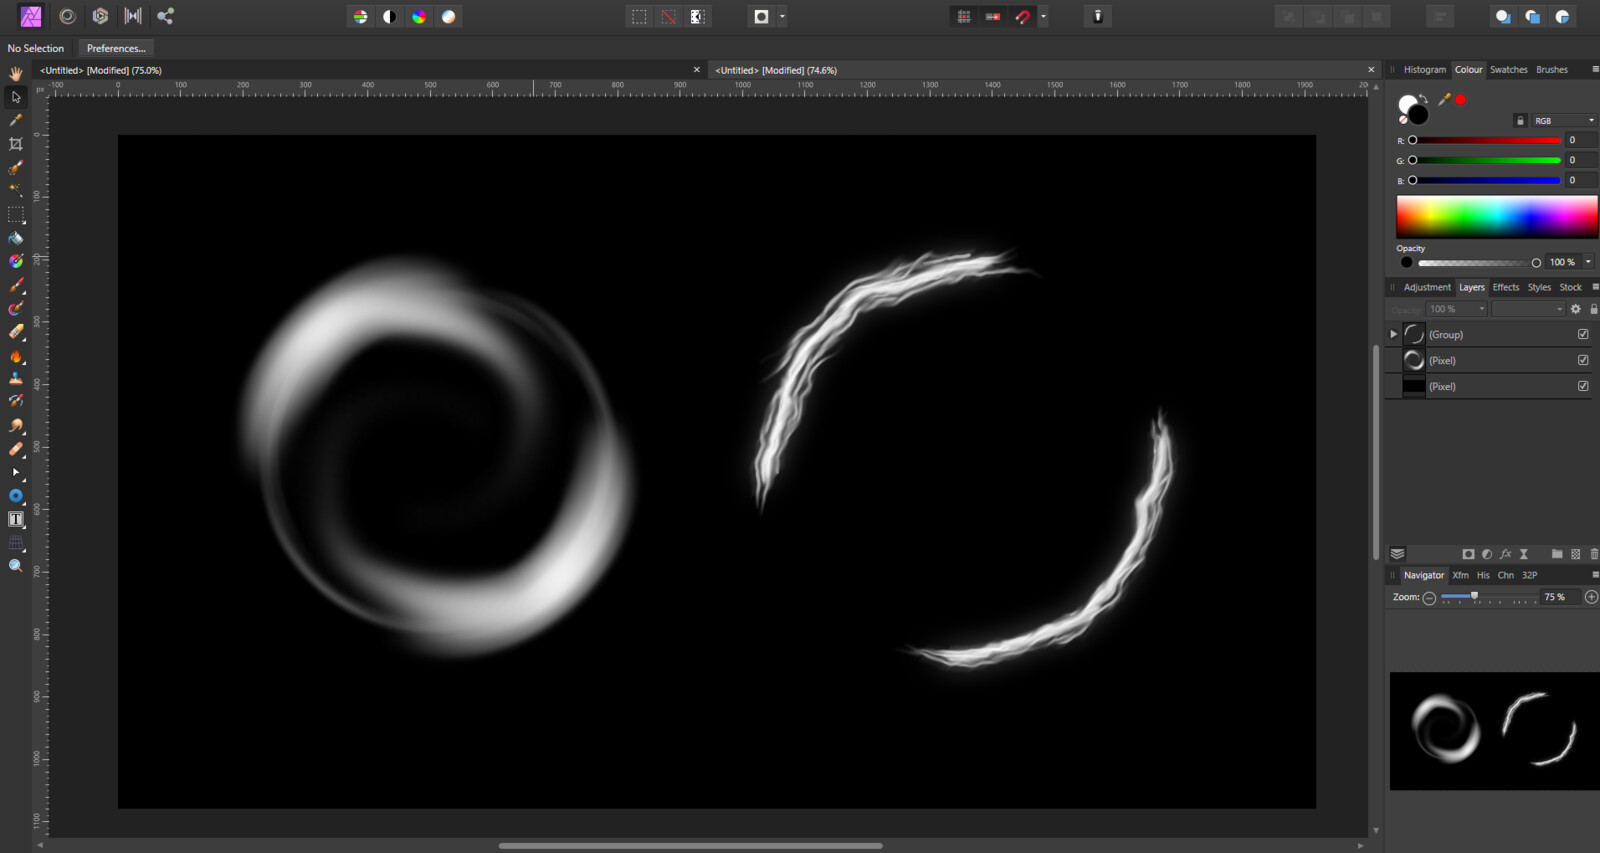 New Tekstures made for the particle effect.